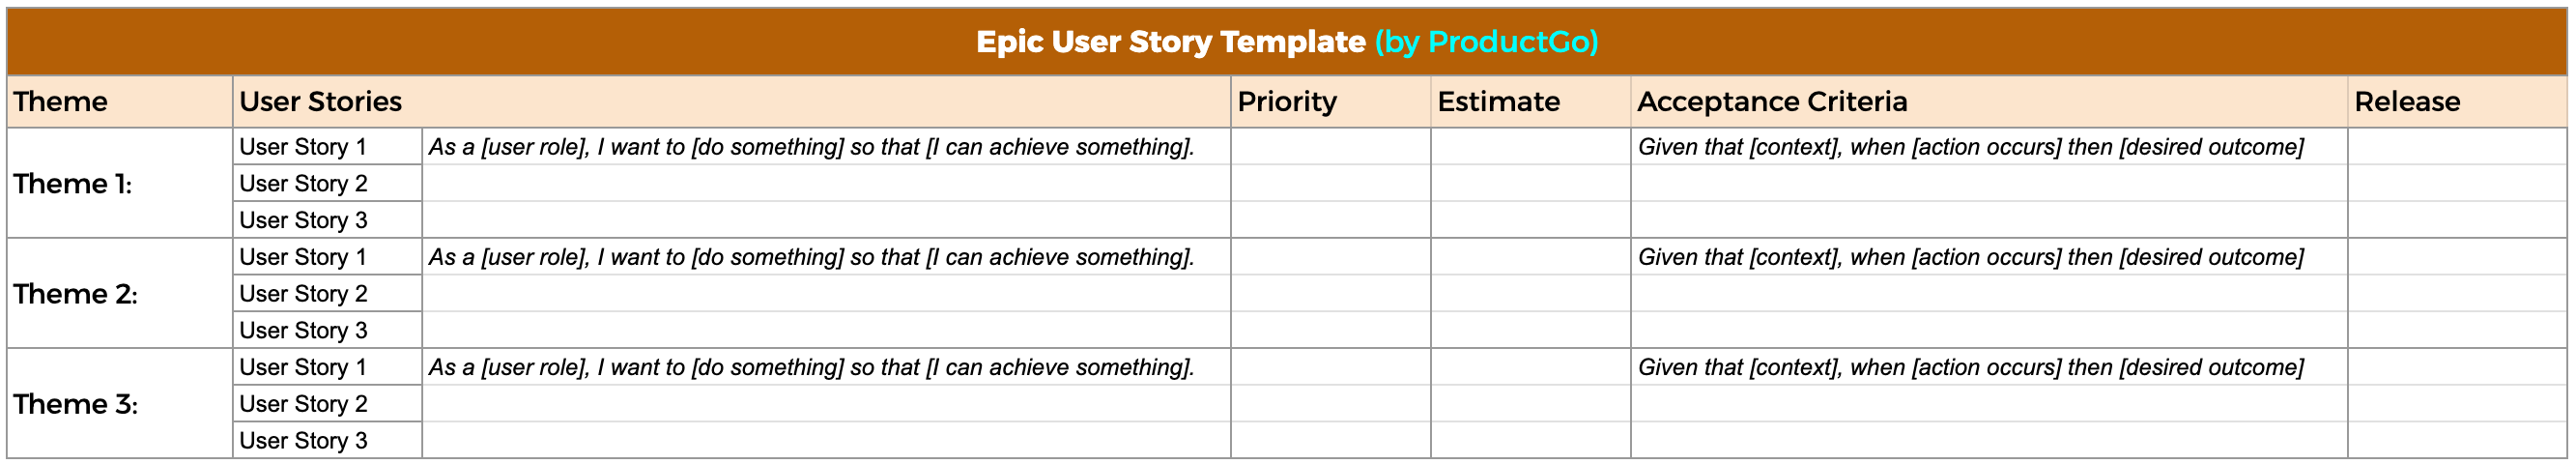 Thematic User Story Template